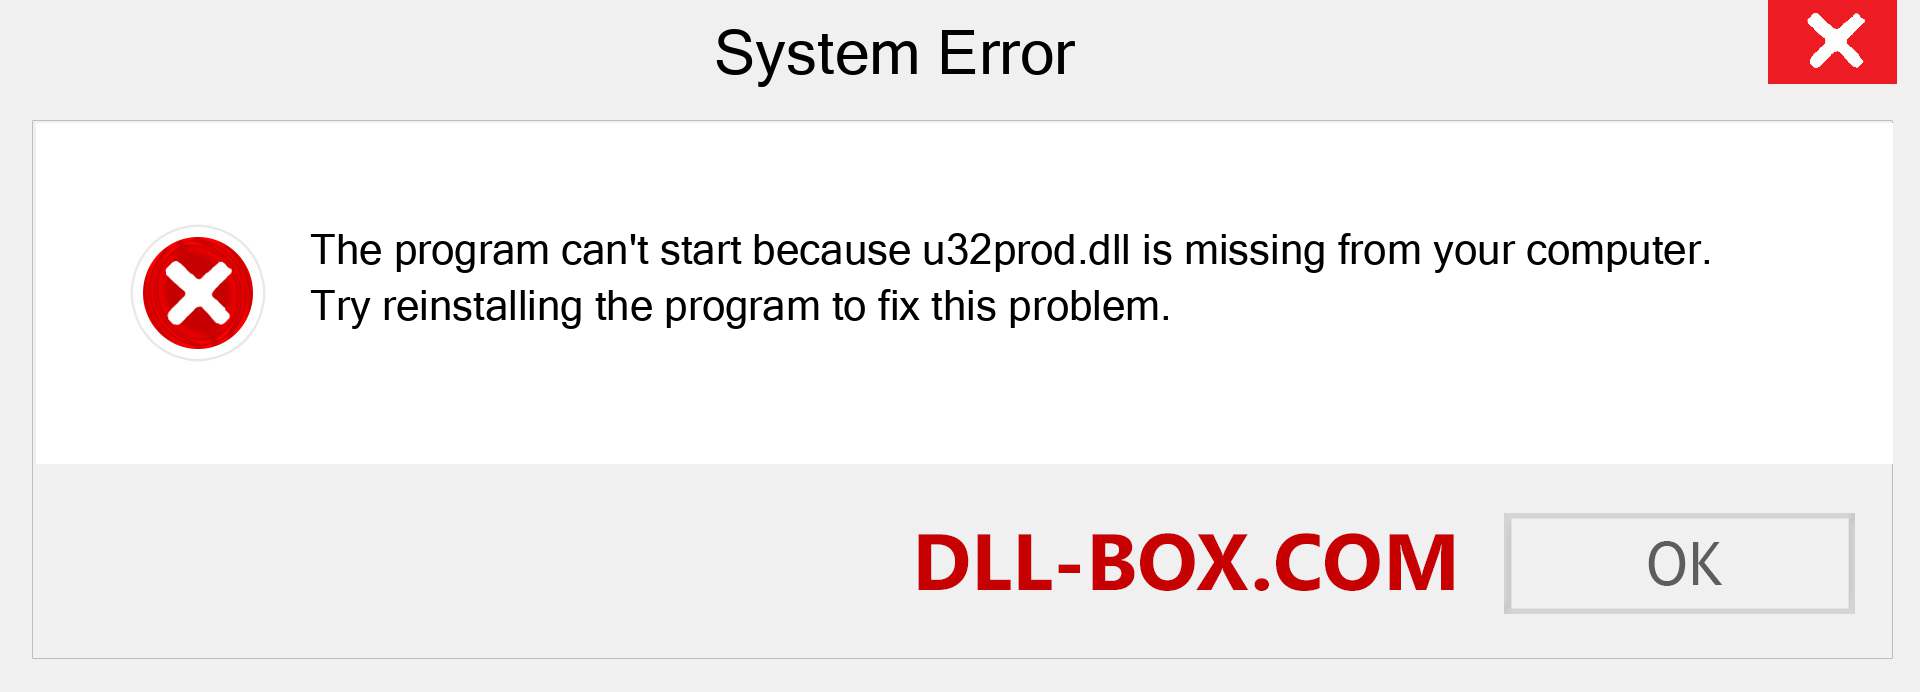  u32prod.dll file is missing?. Download for Windows 7, 8, 10 - Fix  u32prod dll Missing Error on Windows, photos, images